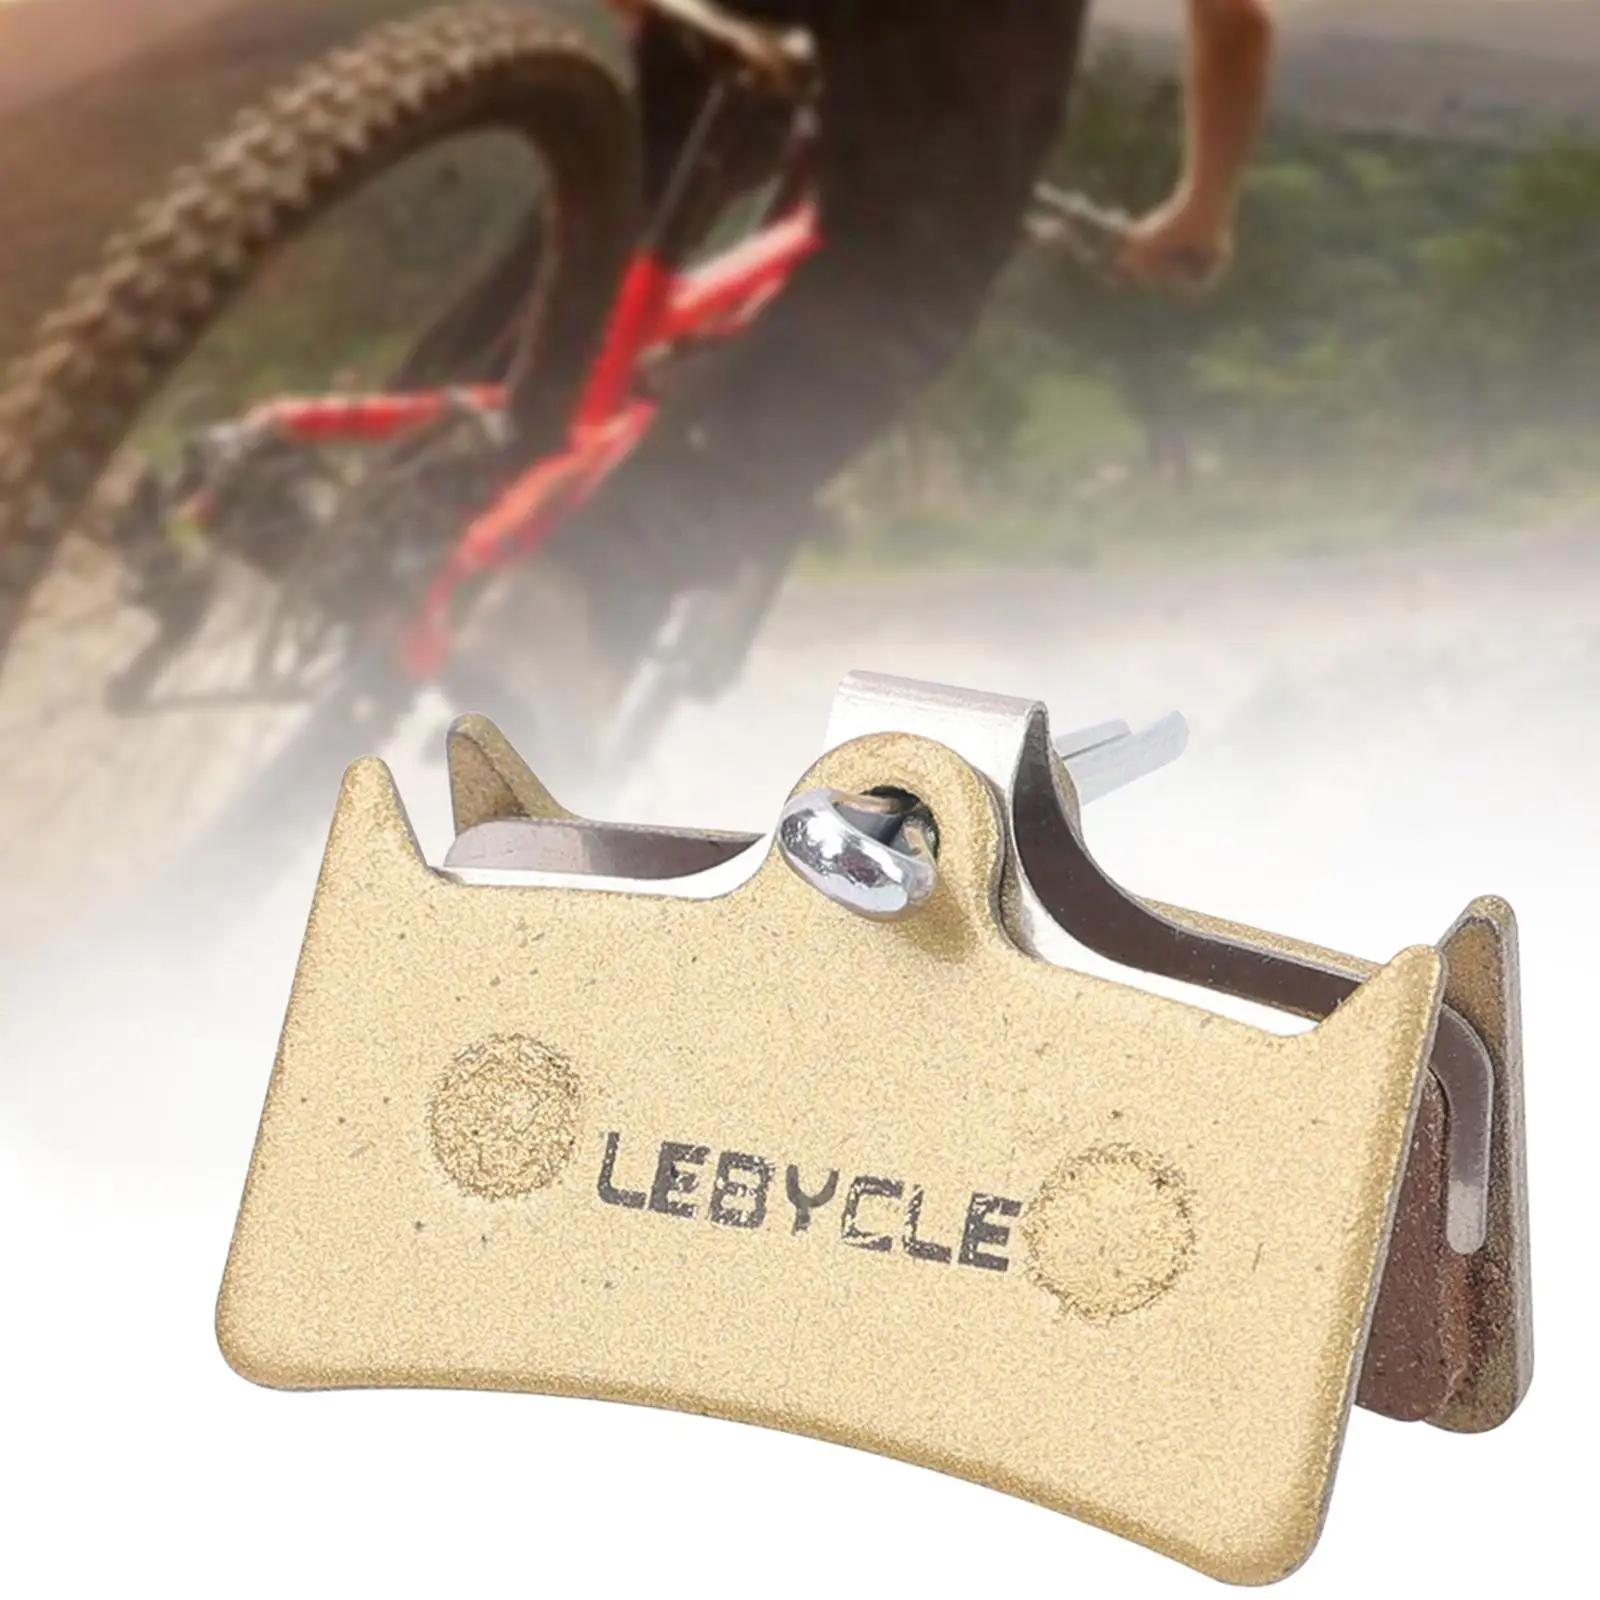 Bike Brake Pads Wear Resistant High Temperature Resistant Sturdy Spare Parts